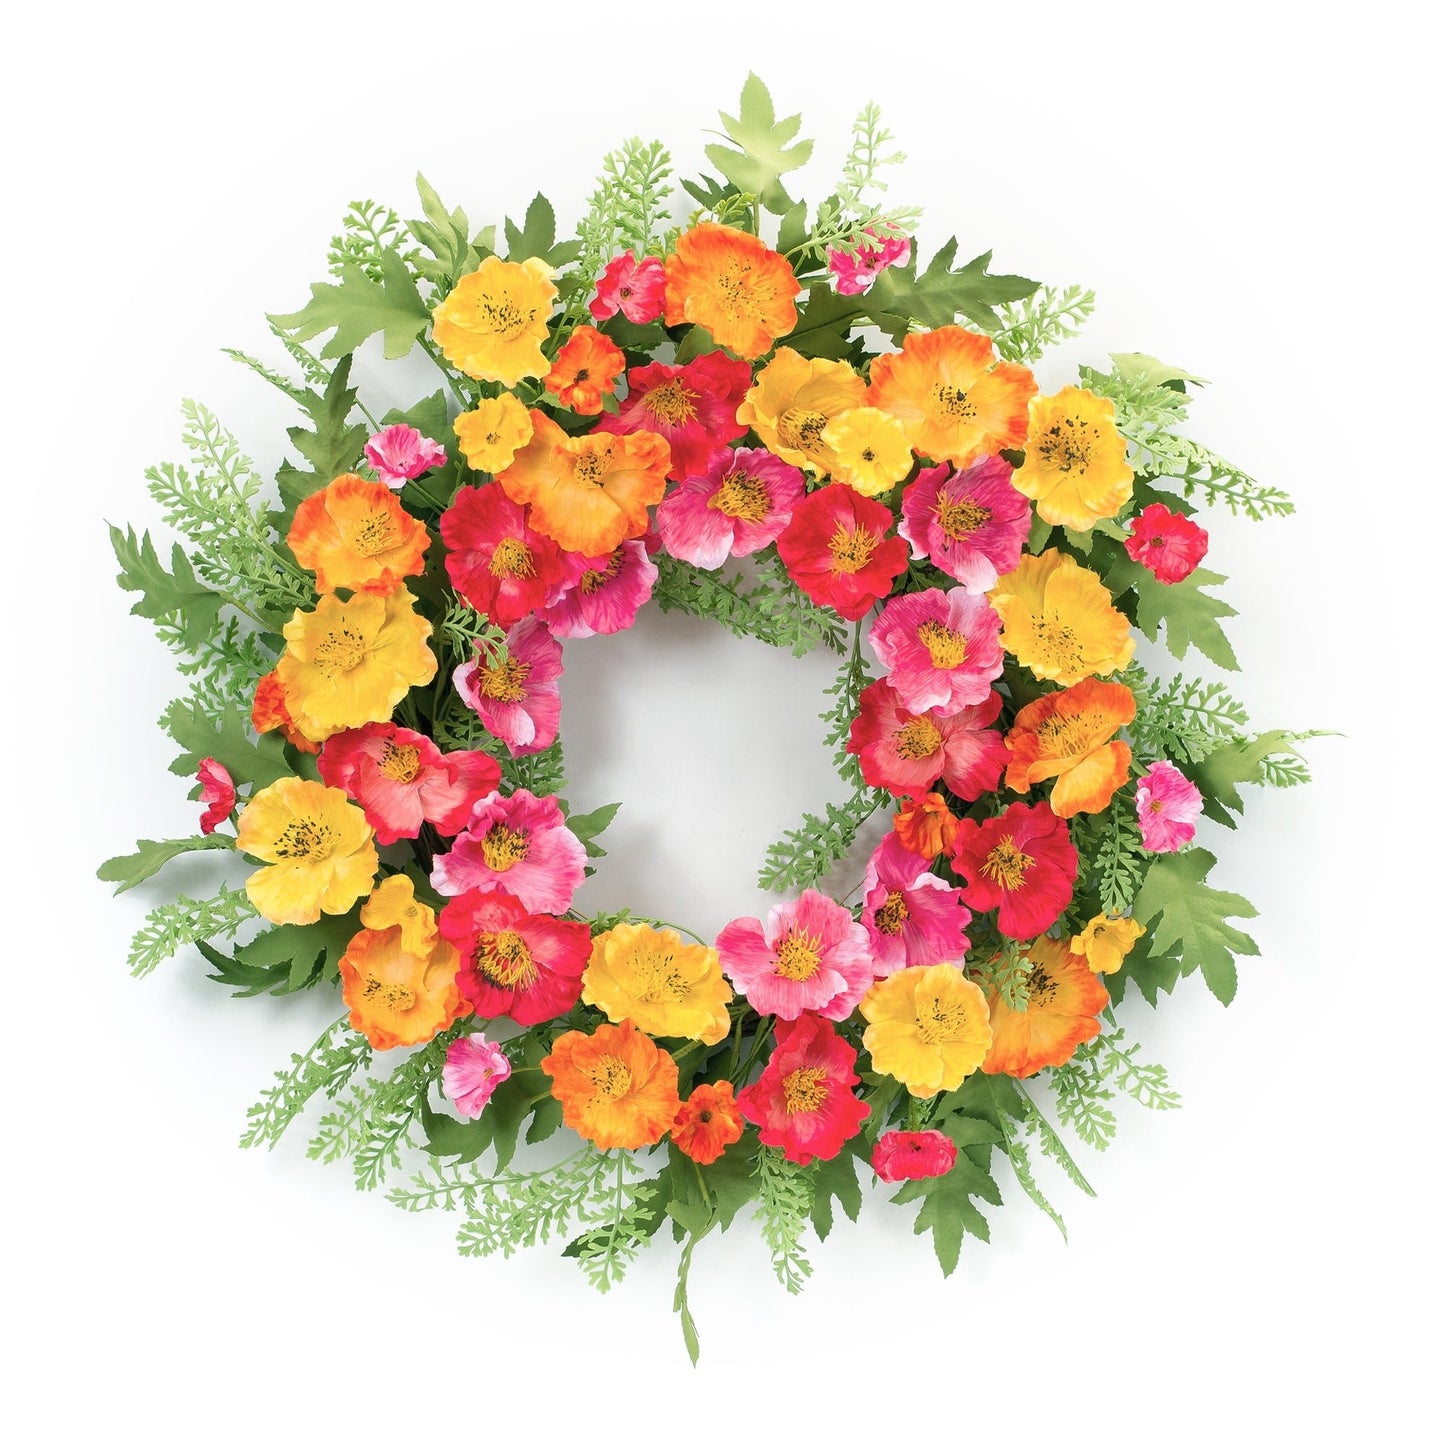 Mixed Poppy Flower and Foliage Wreath 23"D